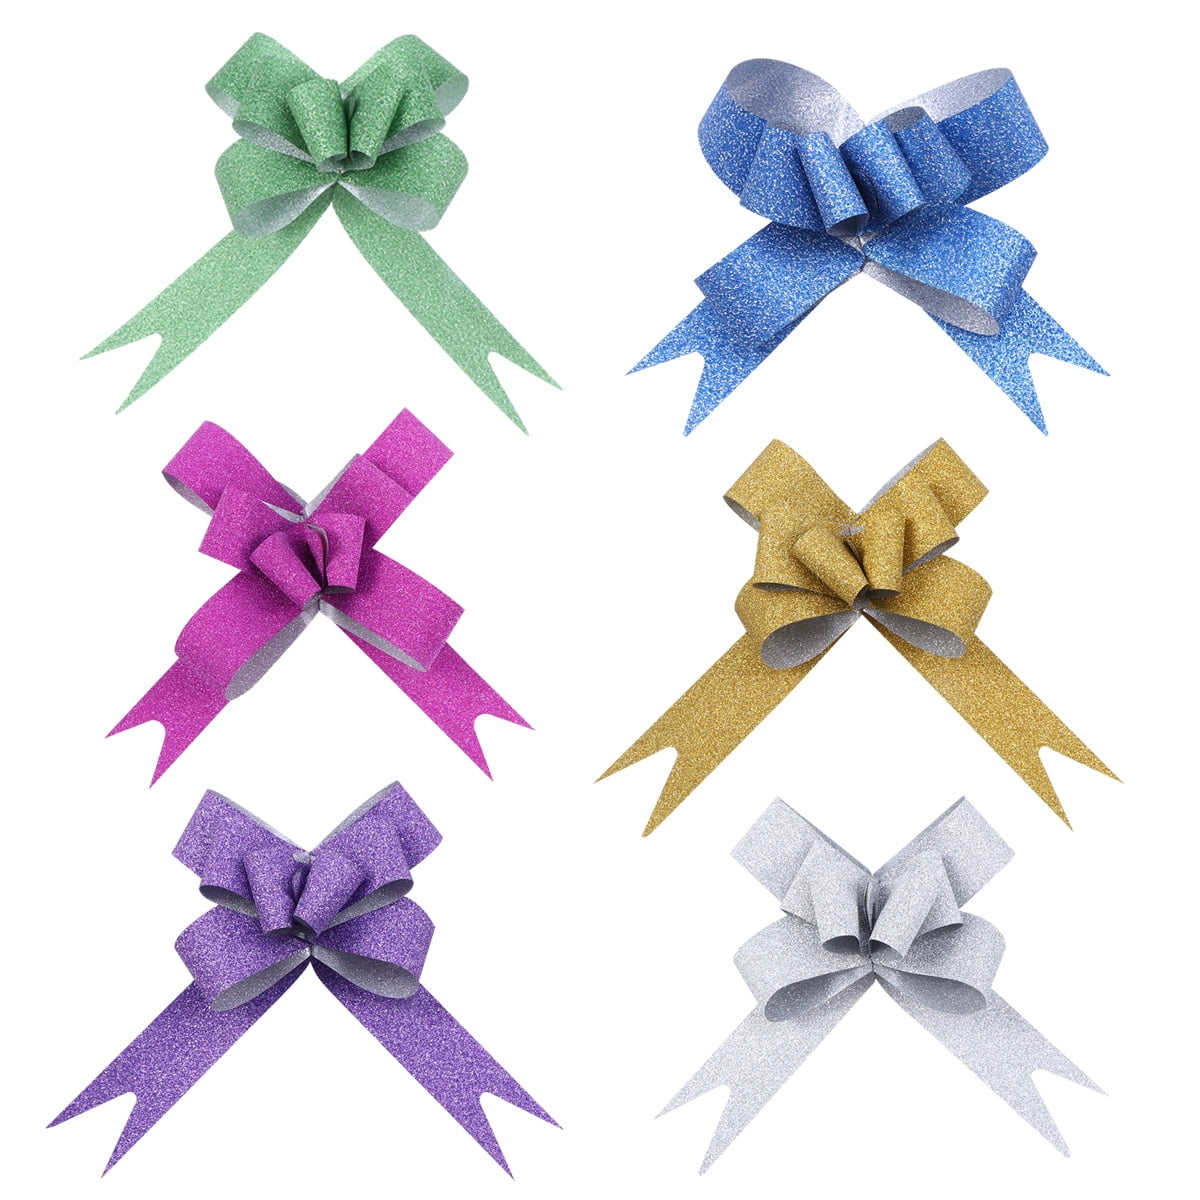 WILLBOND 240 Pieces Pull Bows Decorative Assorted Colors Gift Wrap Ribbon  Pull Bows for Christmas Wedding Party Birthday Car Holiday Presents Bags  Baskets Bottles Decorations, Random Color